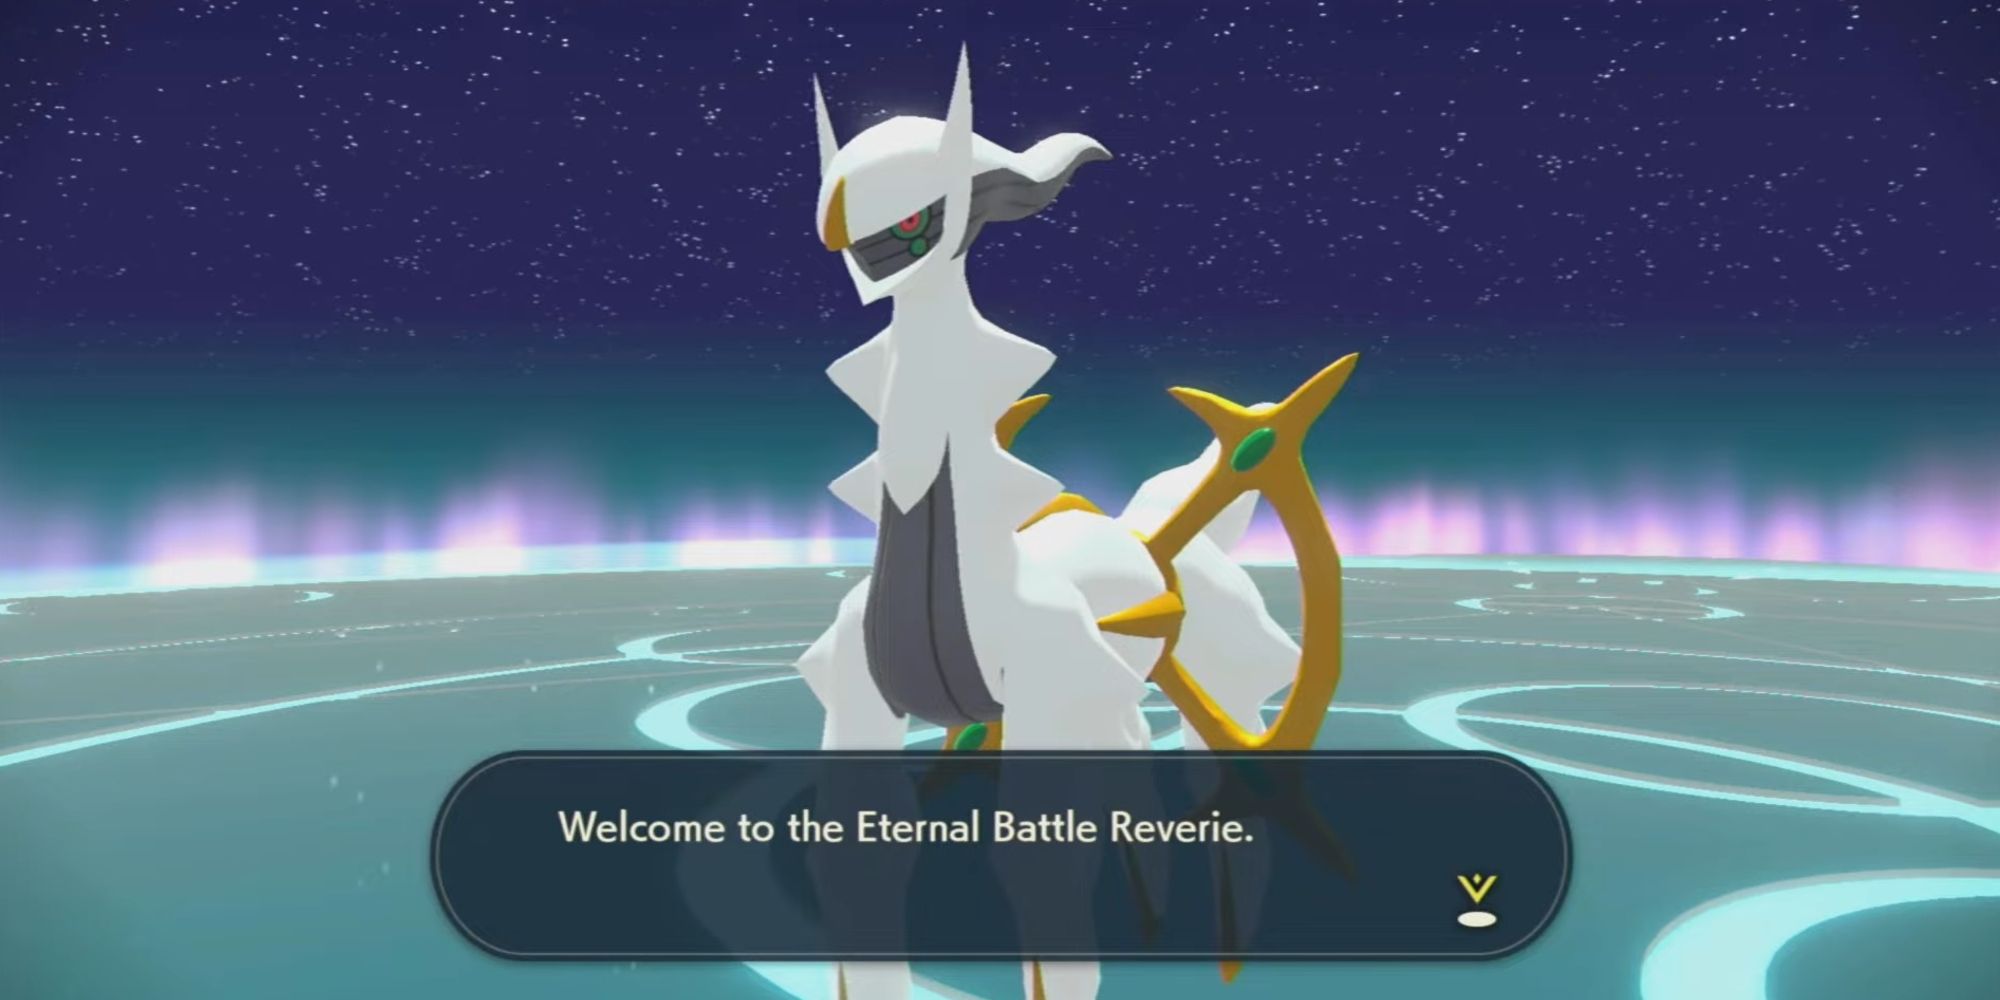 Should Arceus be allowed in PvP or Gym battles upon Pokemon GO debut?